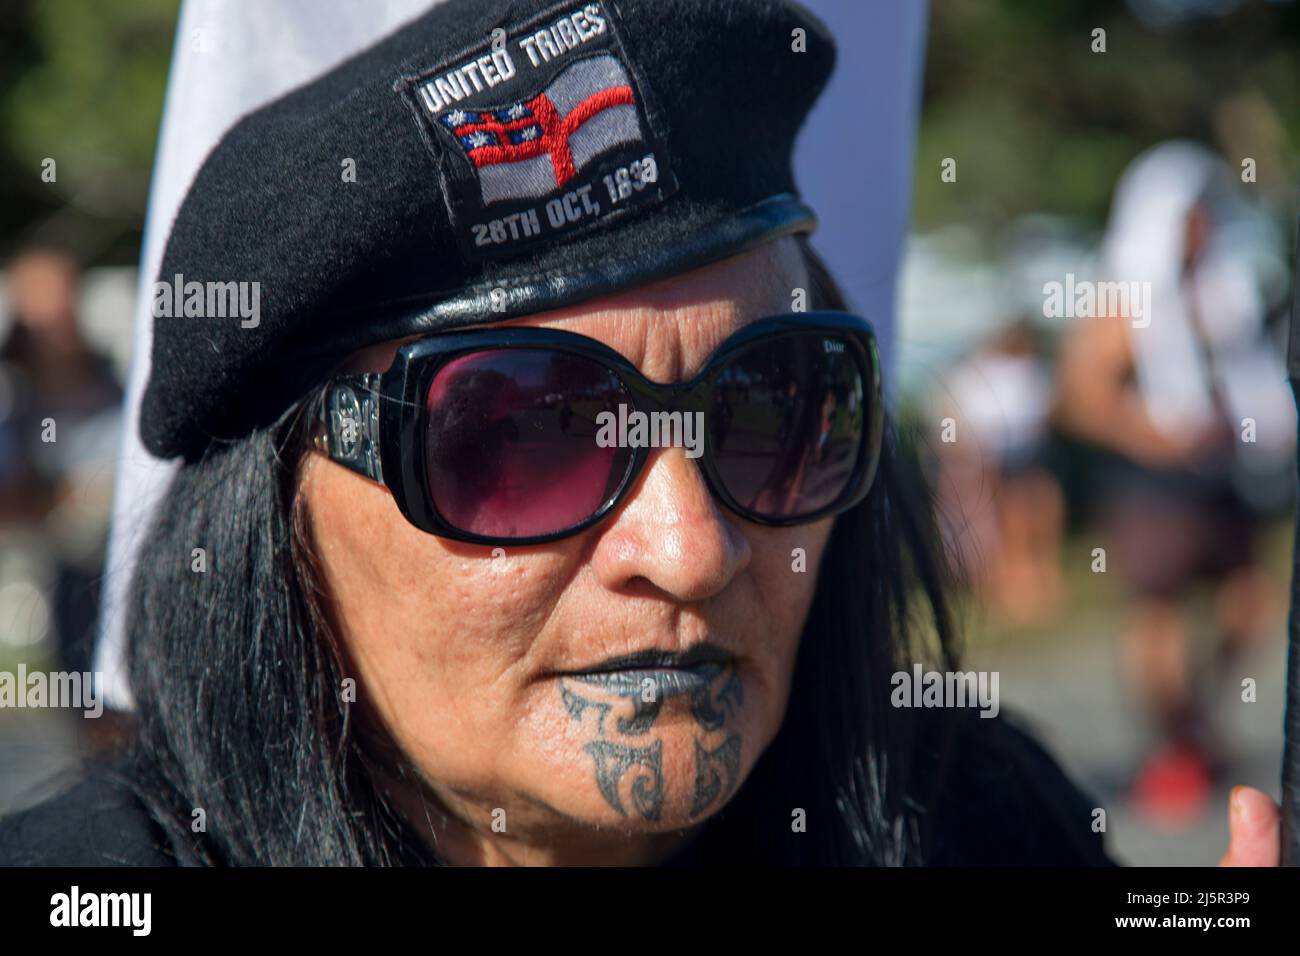 Maori female member of the United Tribes organisation in a protest march during Waitangi day. Waitangi Day is the national day of New Zealand, and com Stock Photo